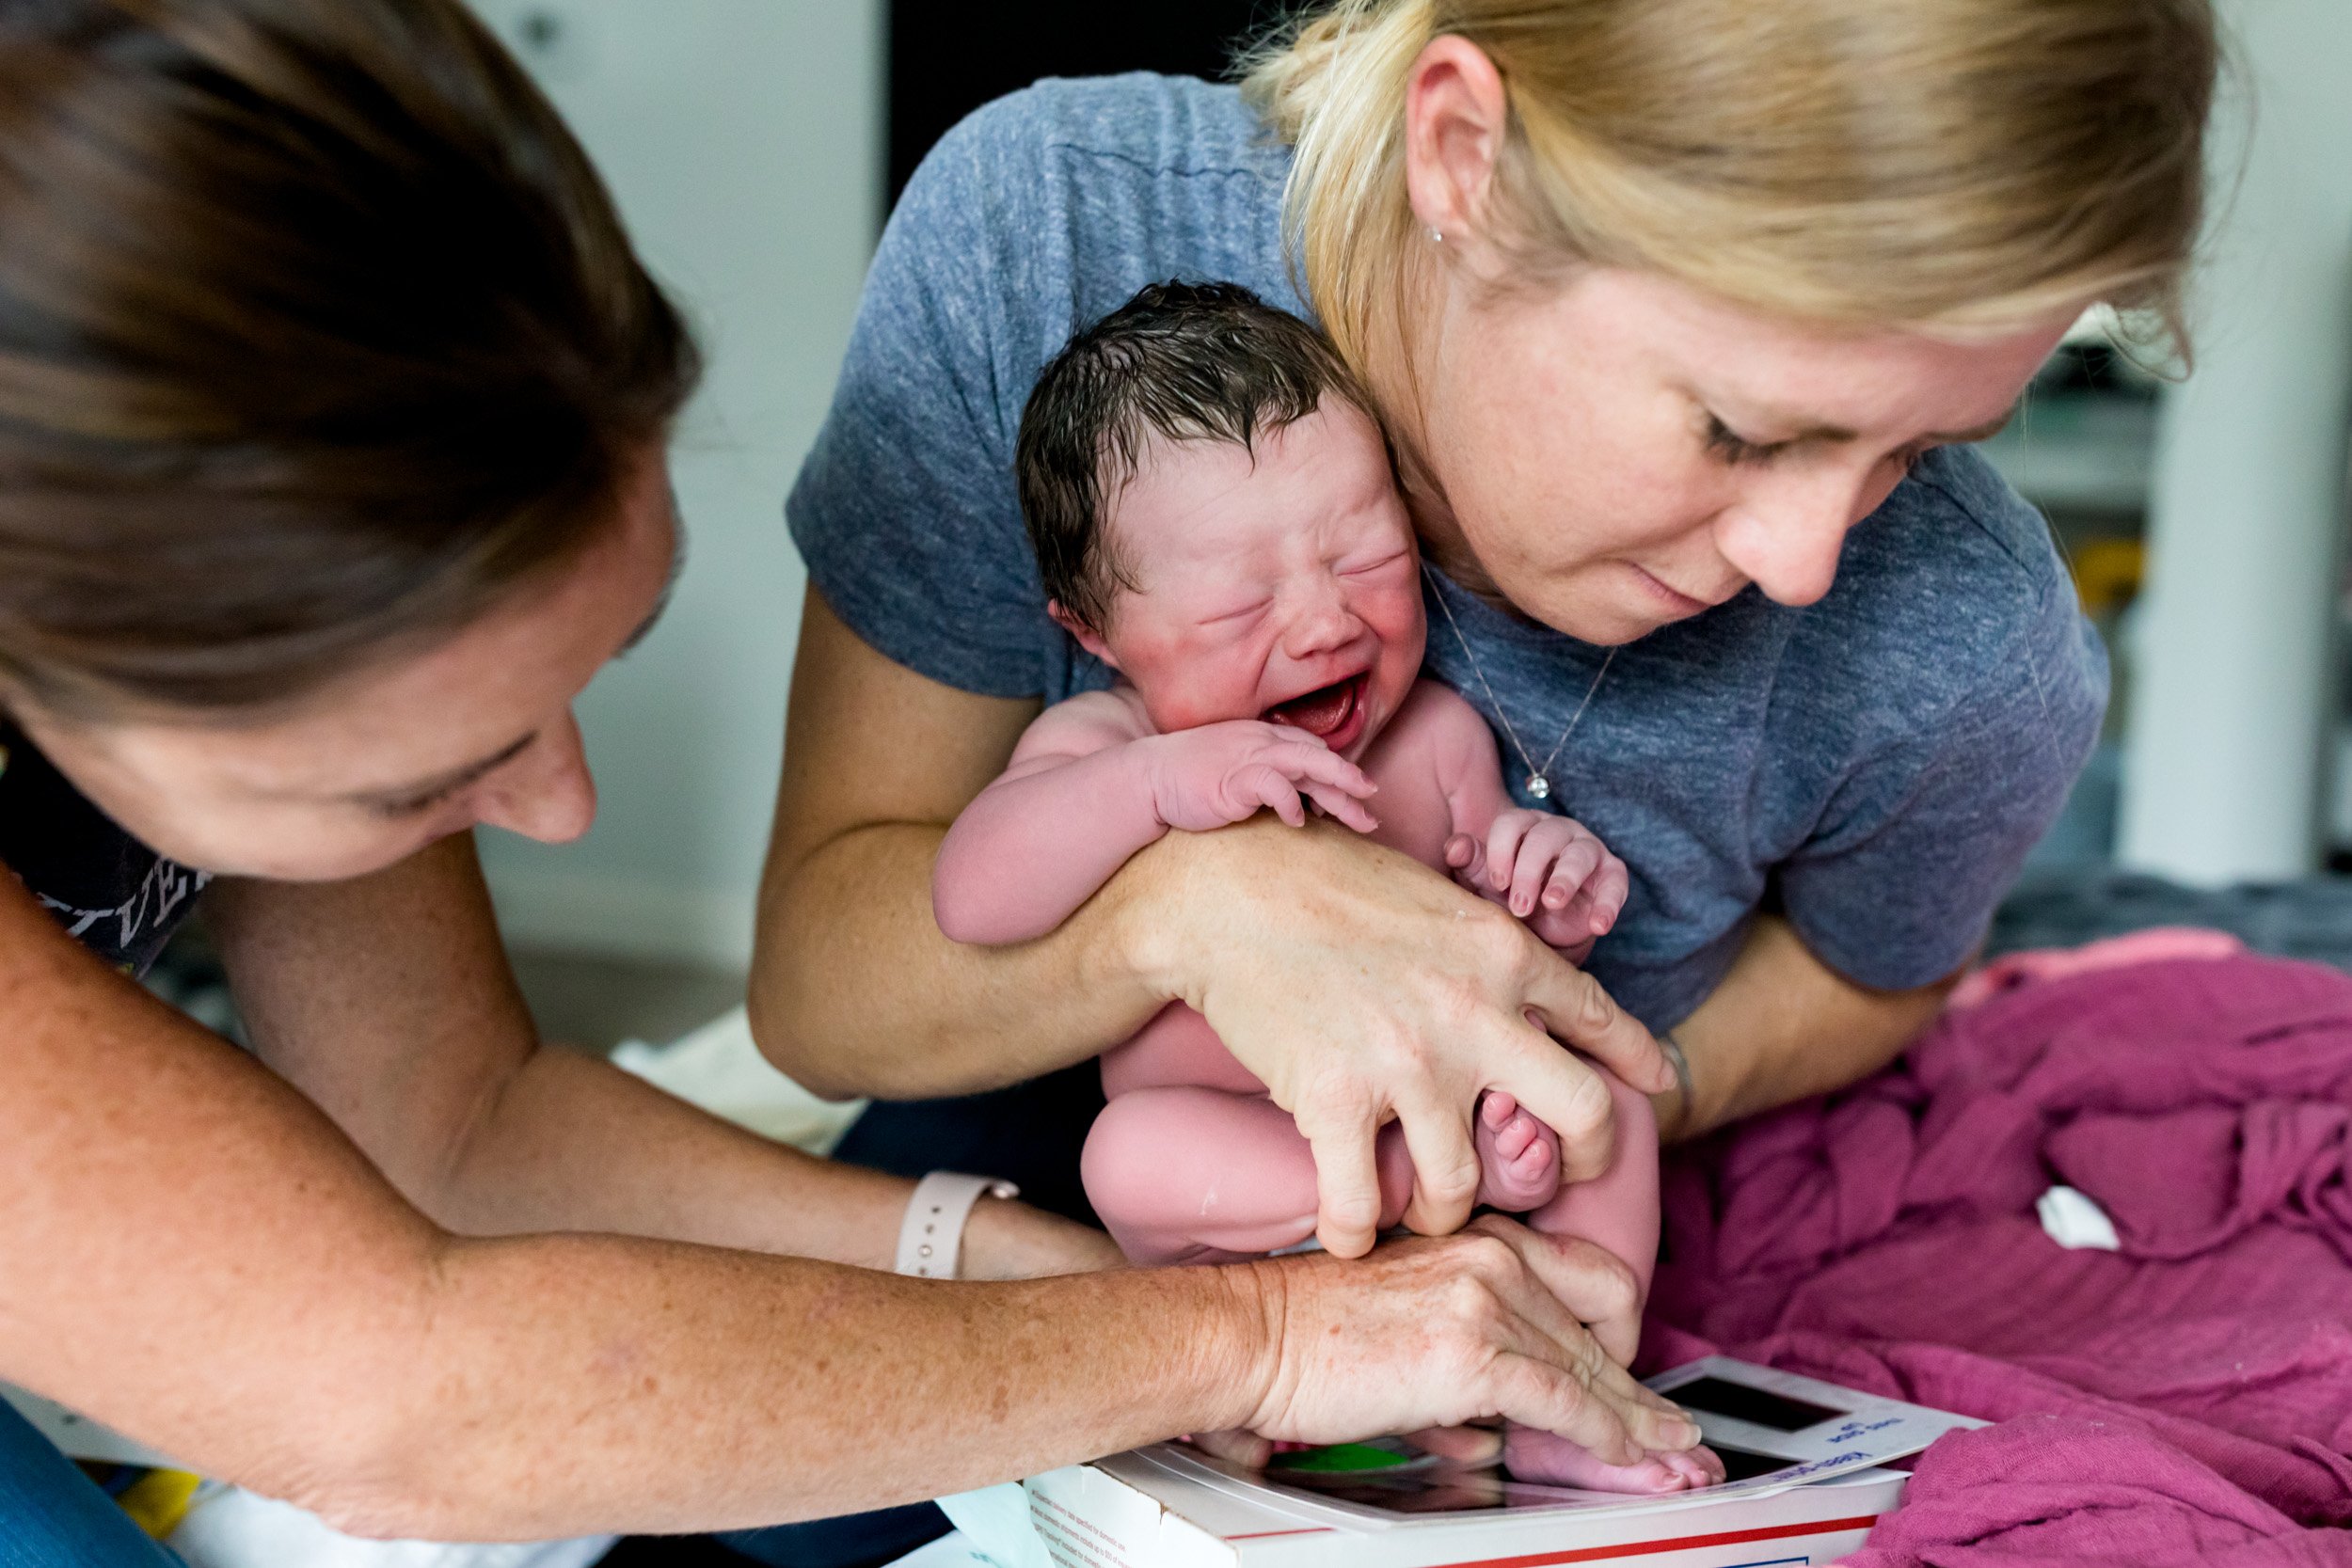 midwife holding baby and making footprints with her assistant helping